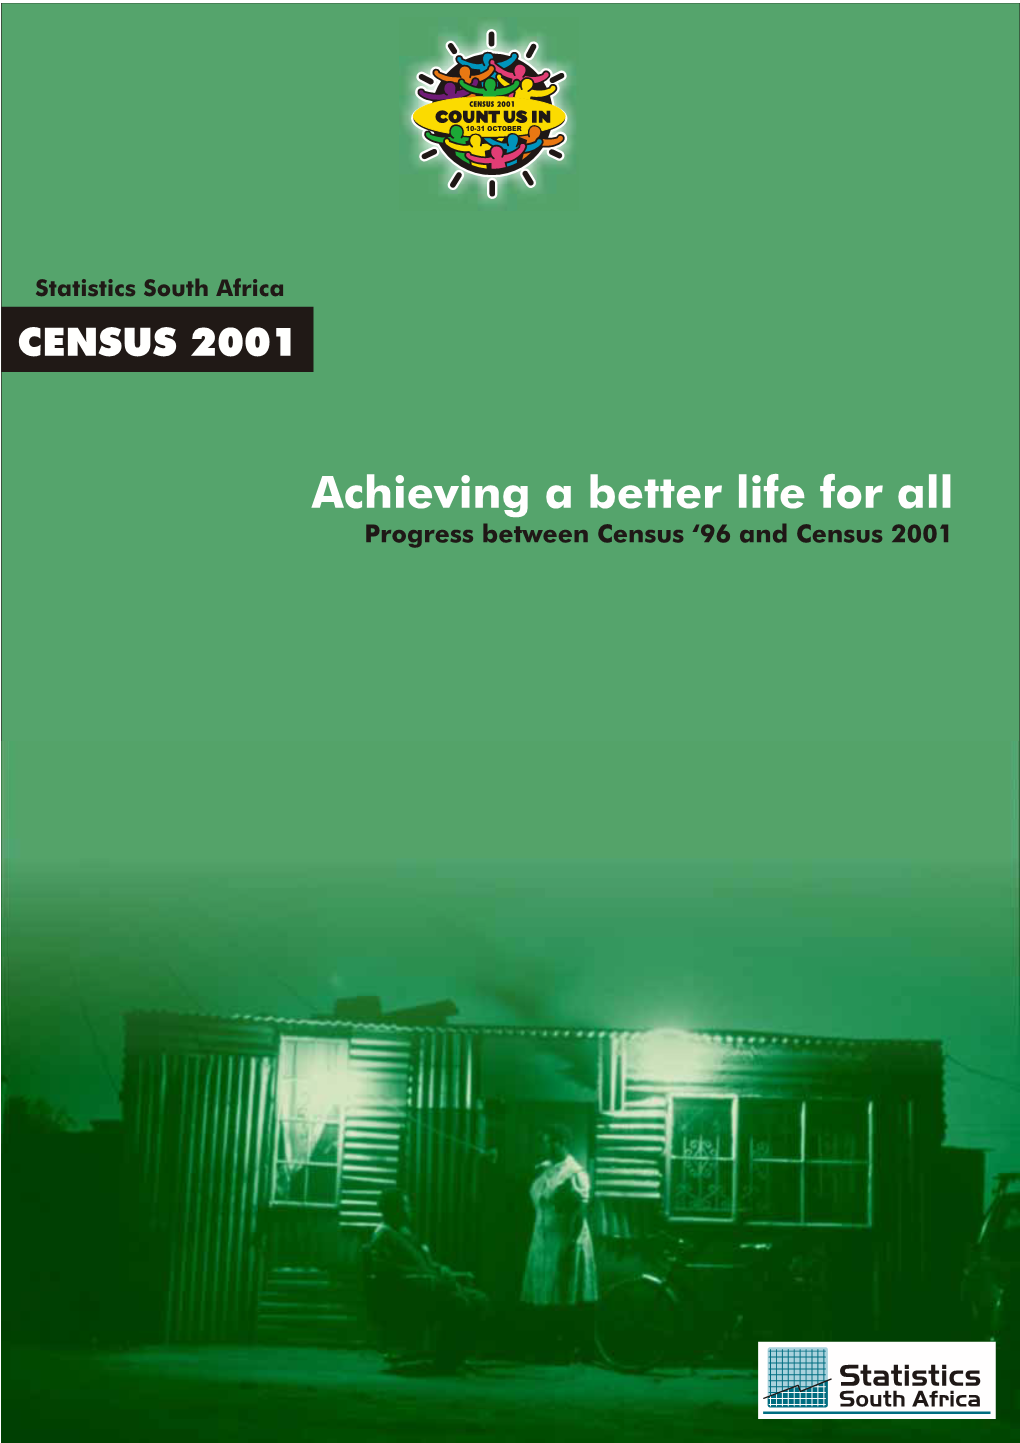 Achieving a Better Life for All Progress Between Census ‘96 and Census 2001 Statistics South Africa Private Bag X44 Pretoria 0001 South Africa